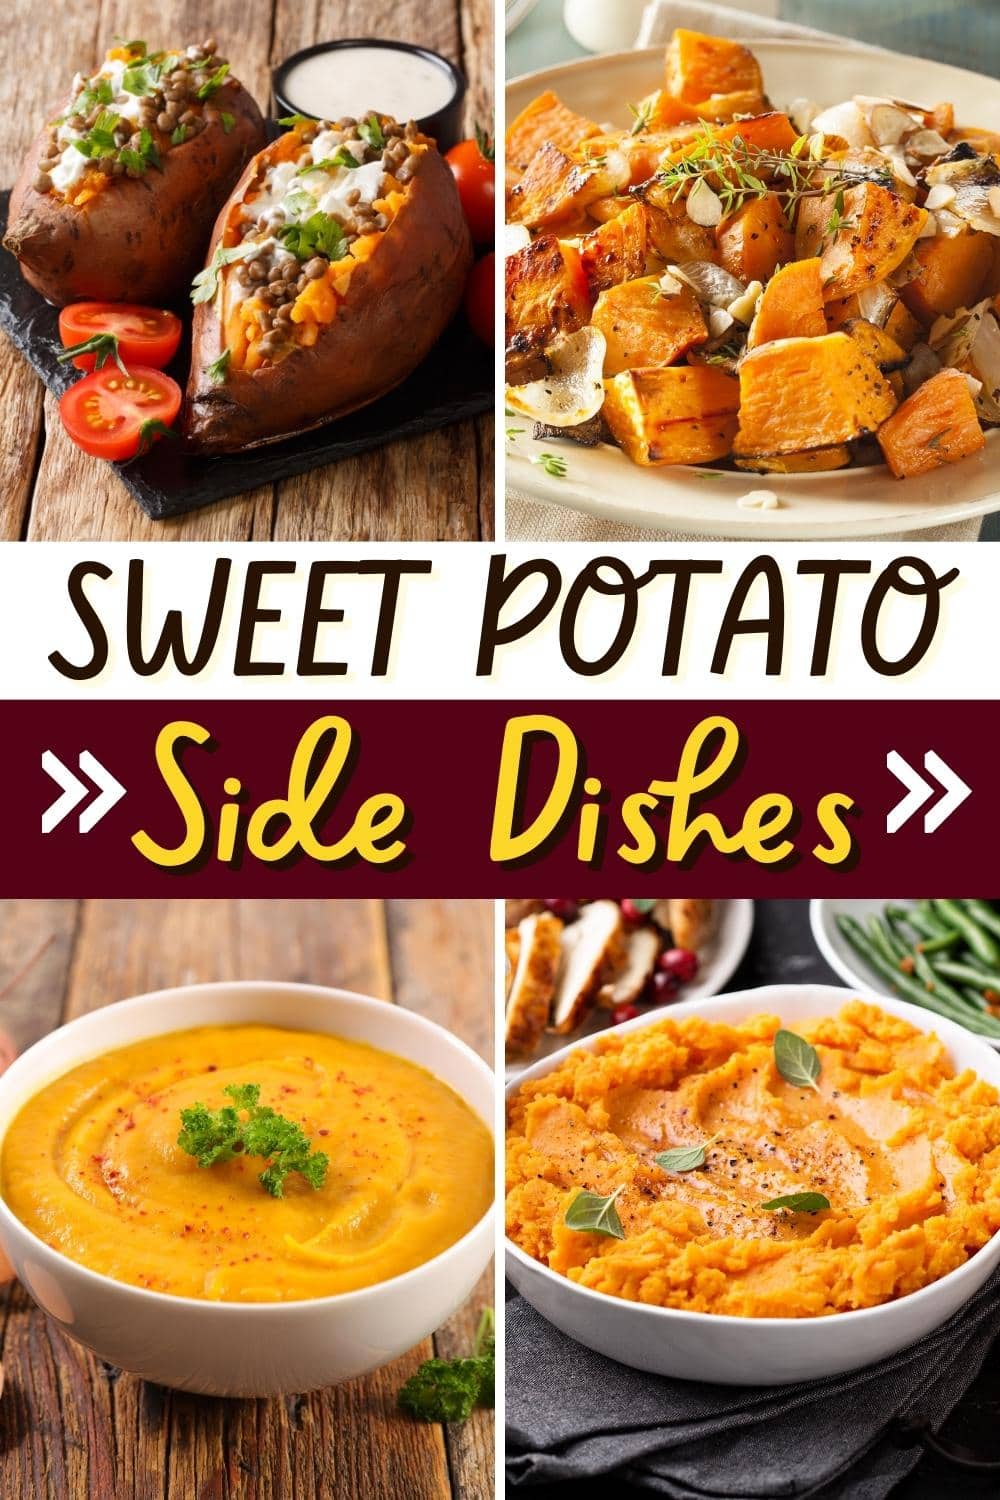 25 Best Sweet Potato Side Dishes (+ Easy Recipes) - Insanely Good